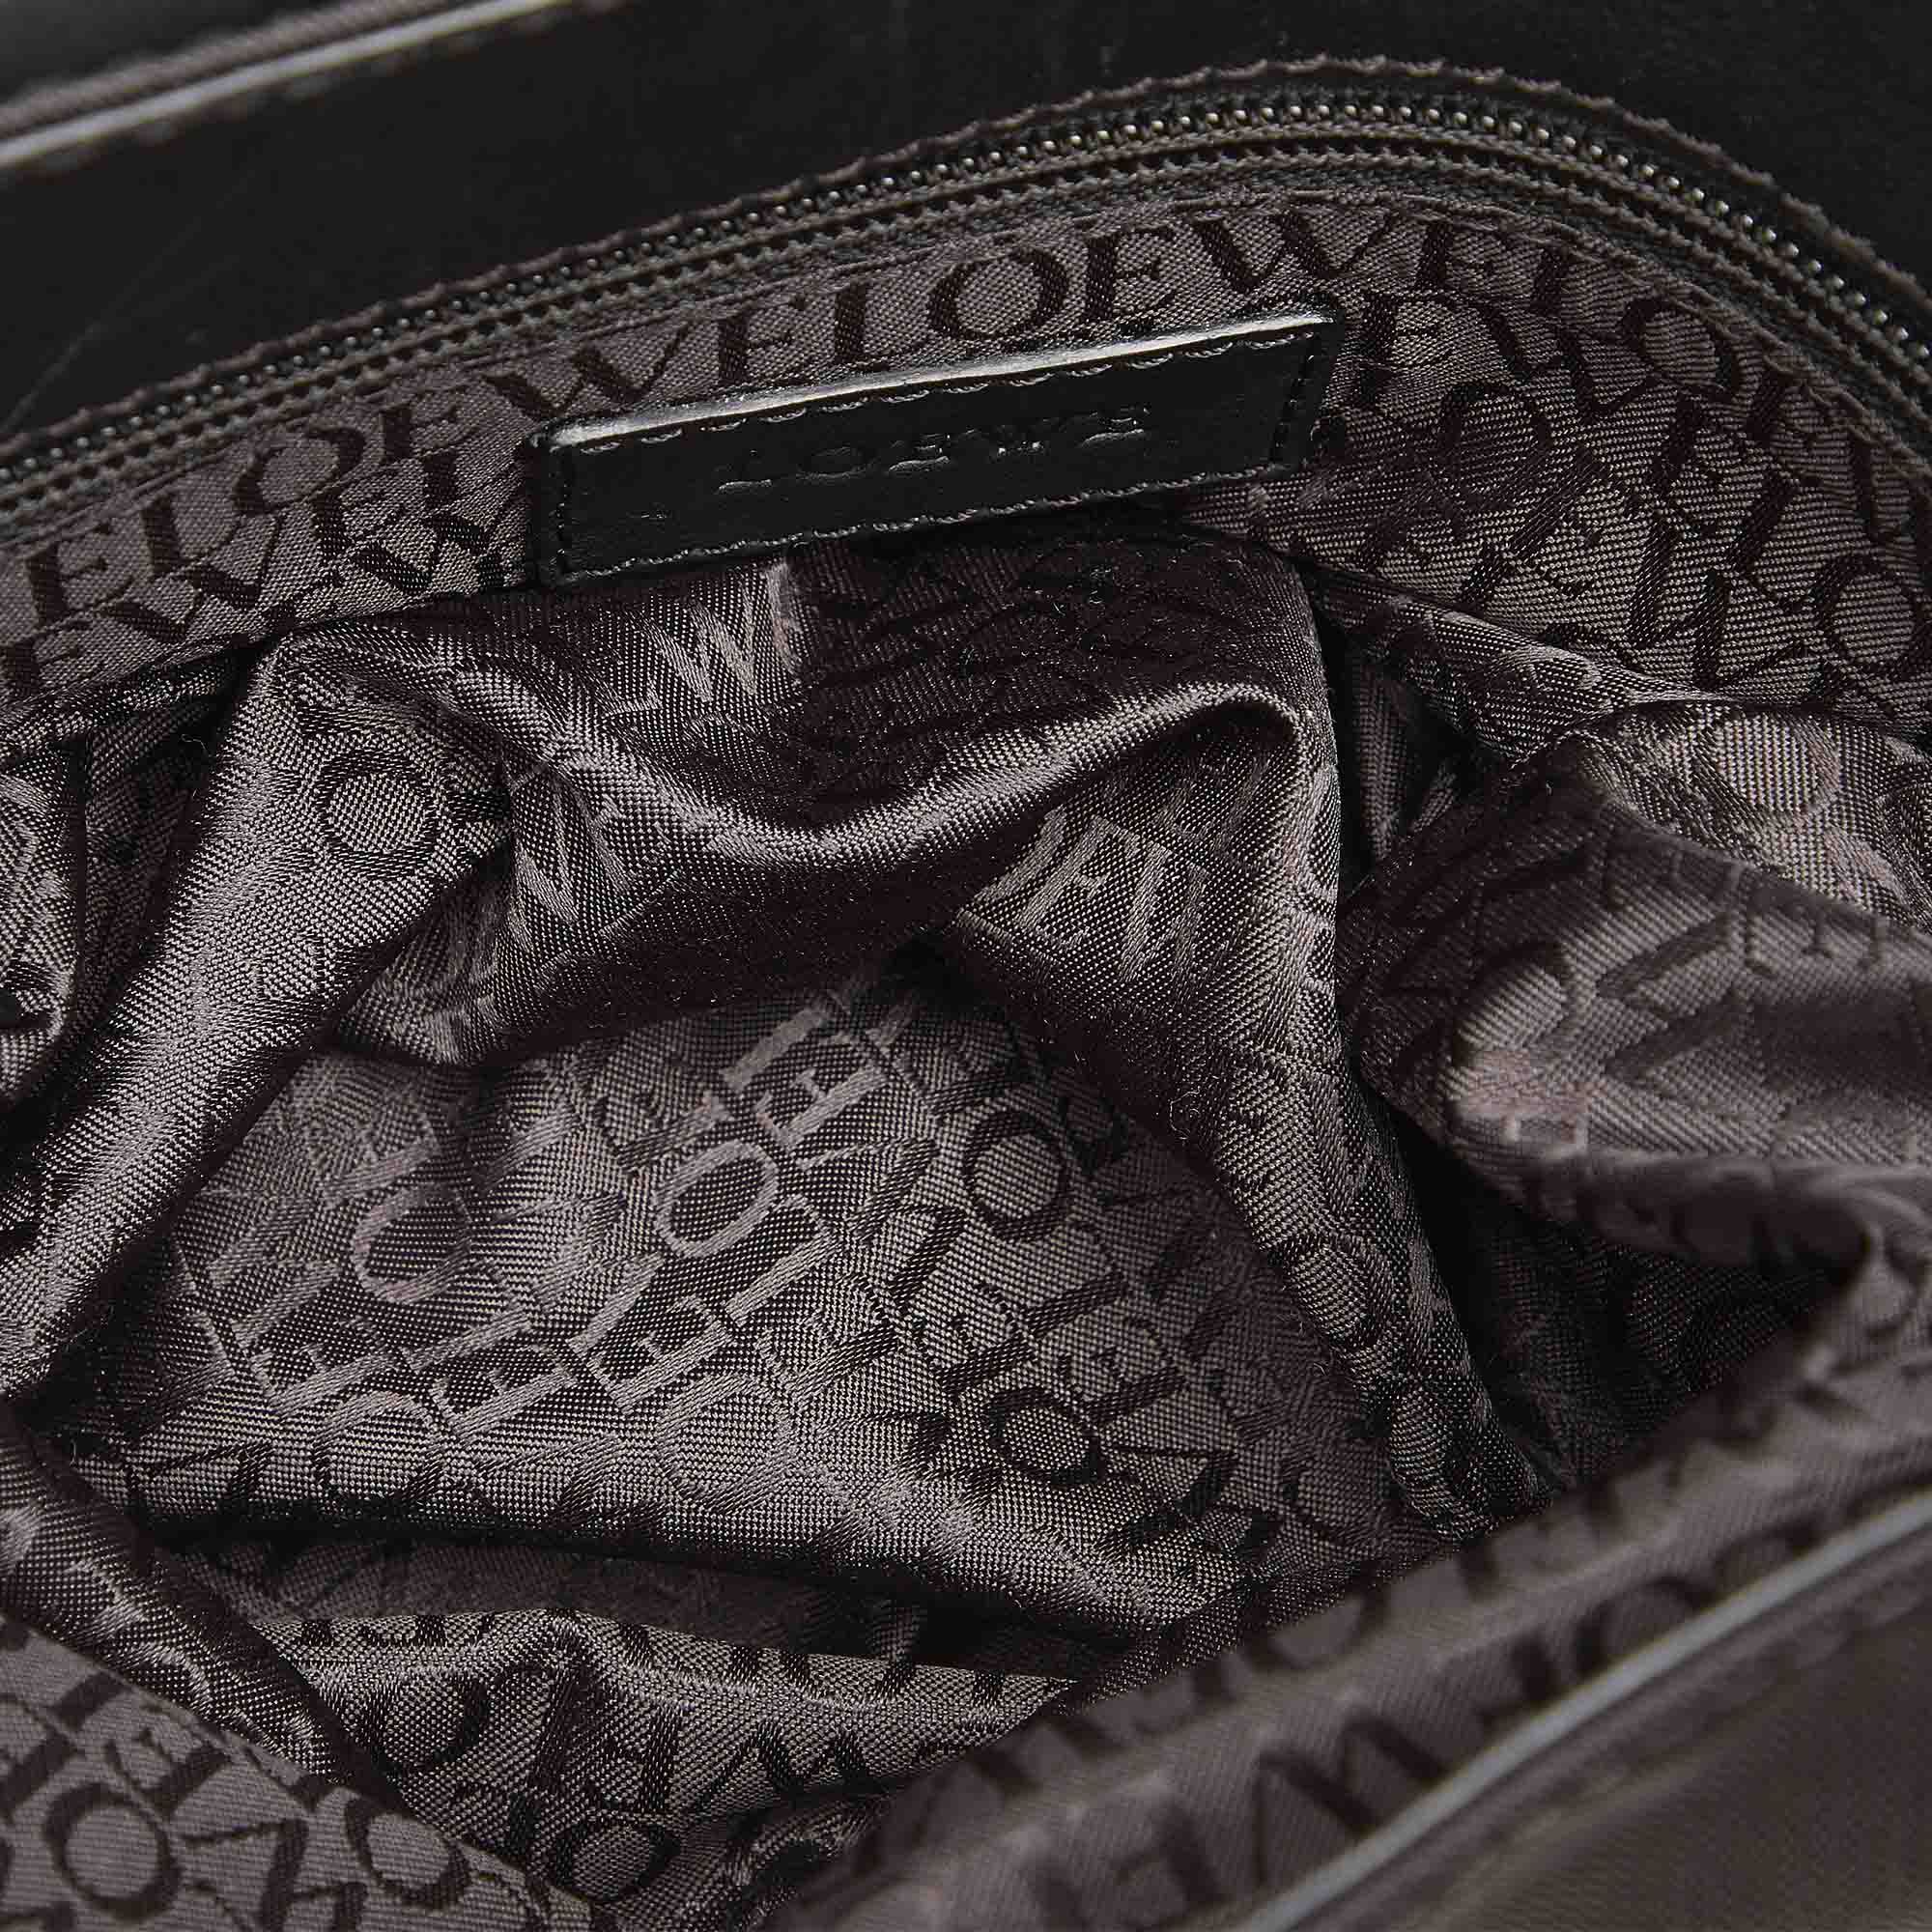 VINTAGE. RRP AS NEW. This crossbody bag features a leather body, an adjustable flat leather strap, a front flap with a hook closure, and an interior zip pocket.
Dimensions:
Length 37cm
Width 31cm
Depth 2cm
Shoulder Drop 63cm

Original Accessories: Dust Bag

Color: Black
Material: Leather x Calf
Country of Origin: Spain
Boutique Reference: SSU95185K1342


Product Rating: GoodCondition